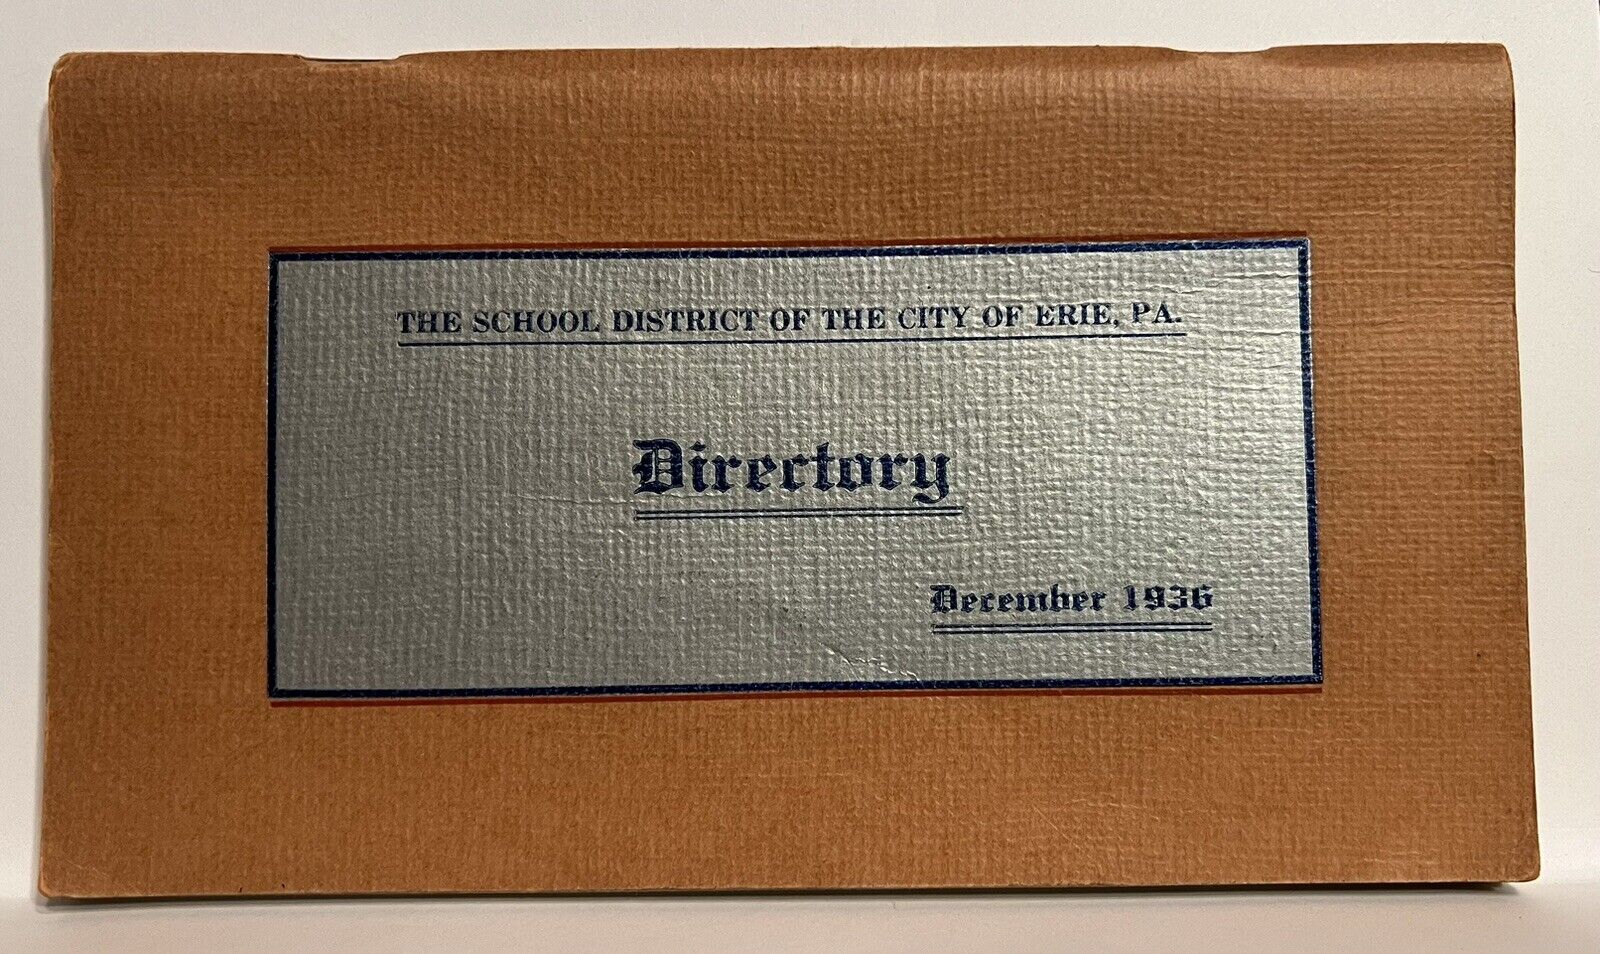 ERIE, PA Rare School Directory Antique Address & Phone Book Dec. 1936 MUST SEE